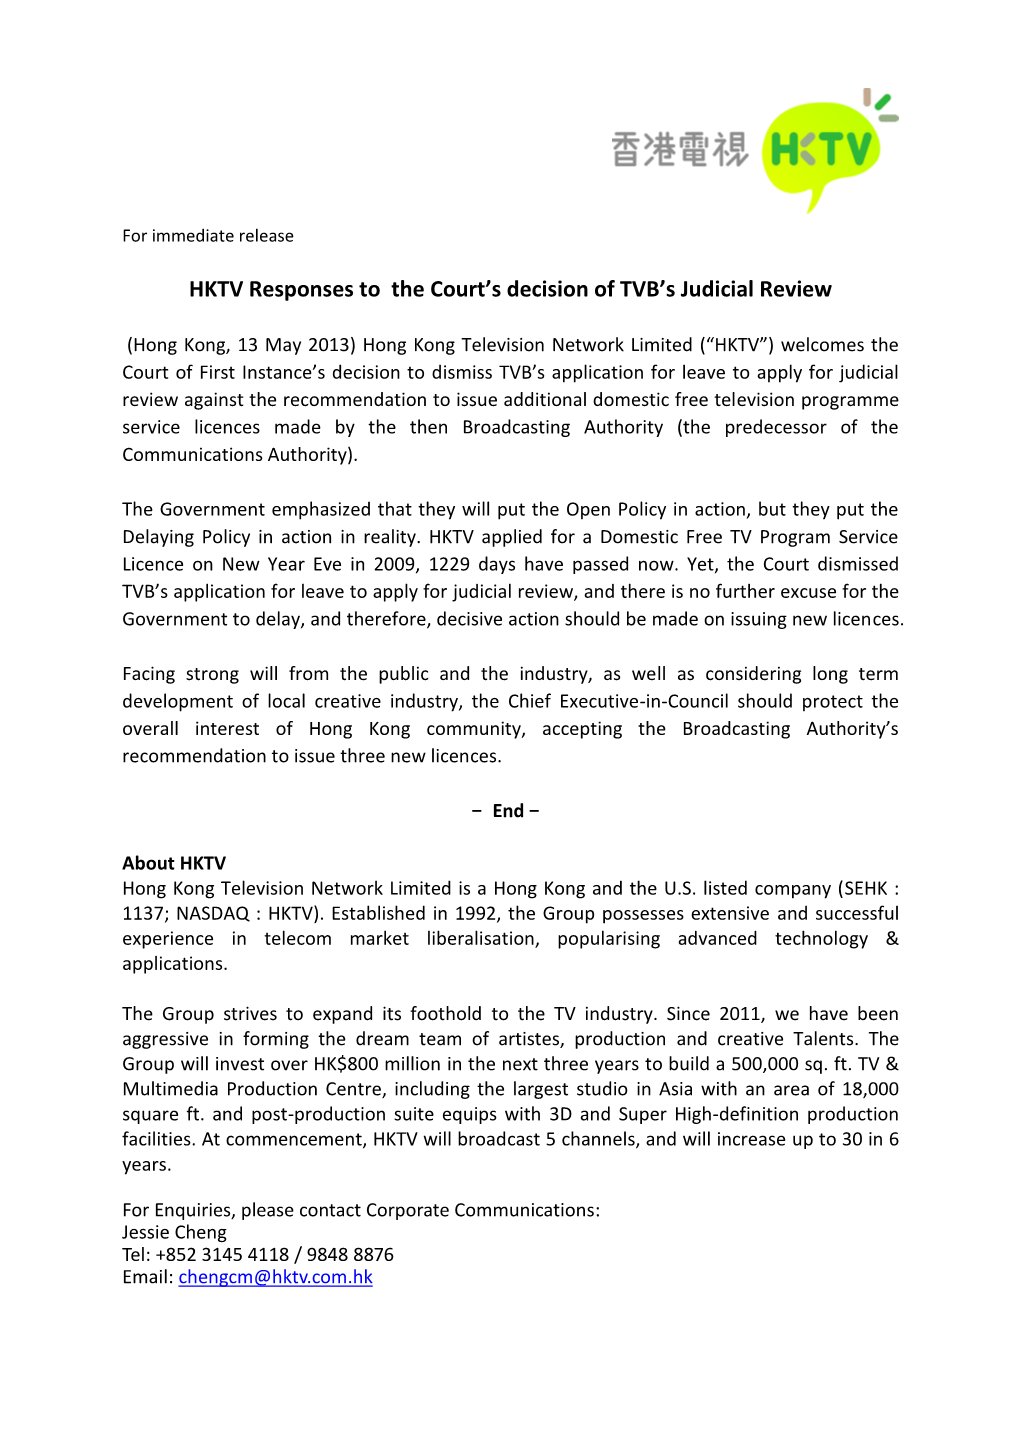 HKTV Responses to the Court's Decision of TVB's Judicial Review